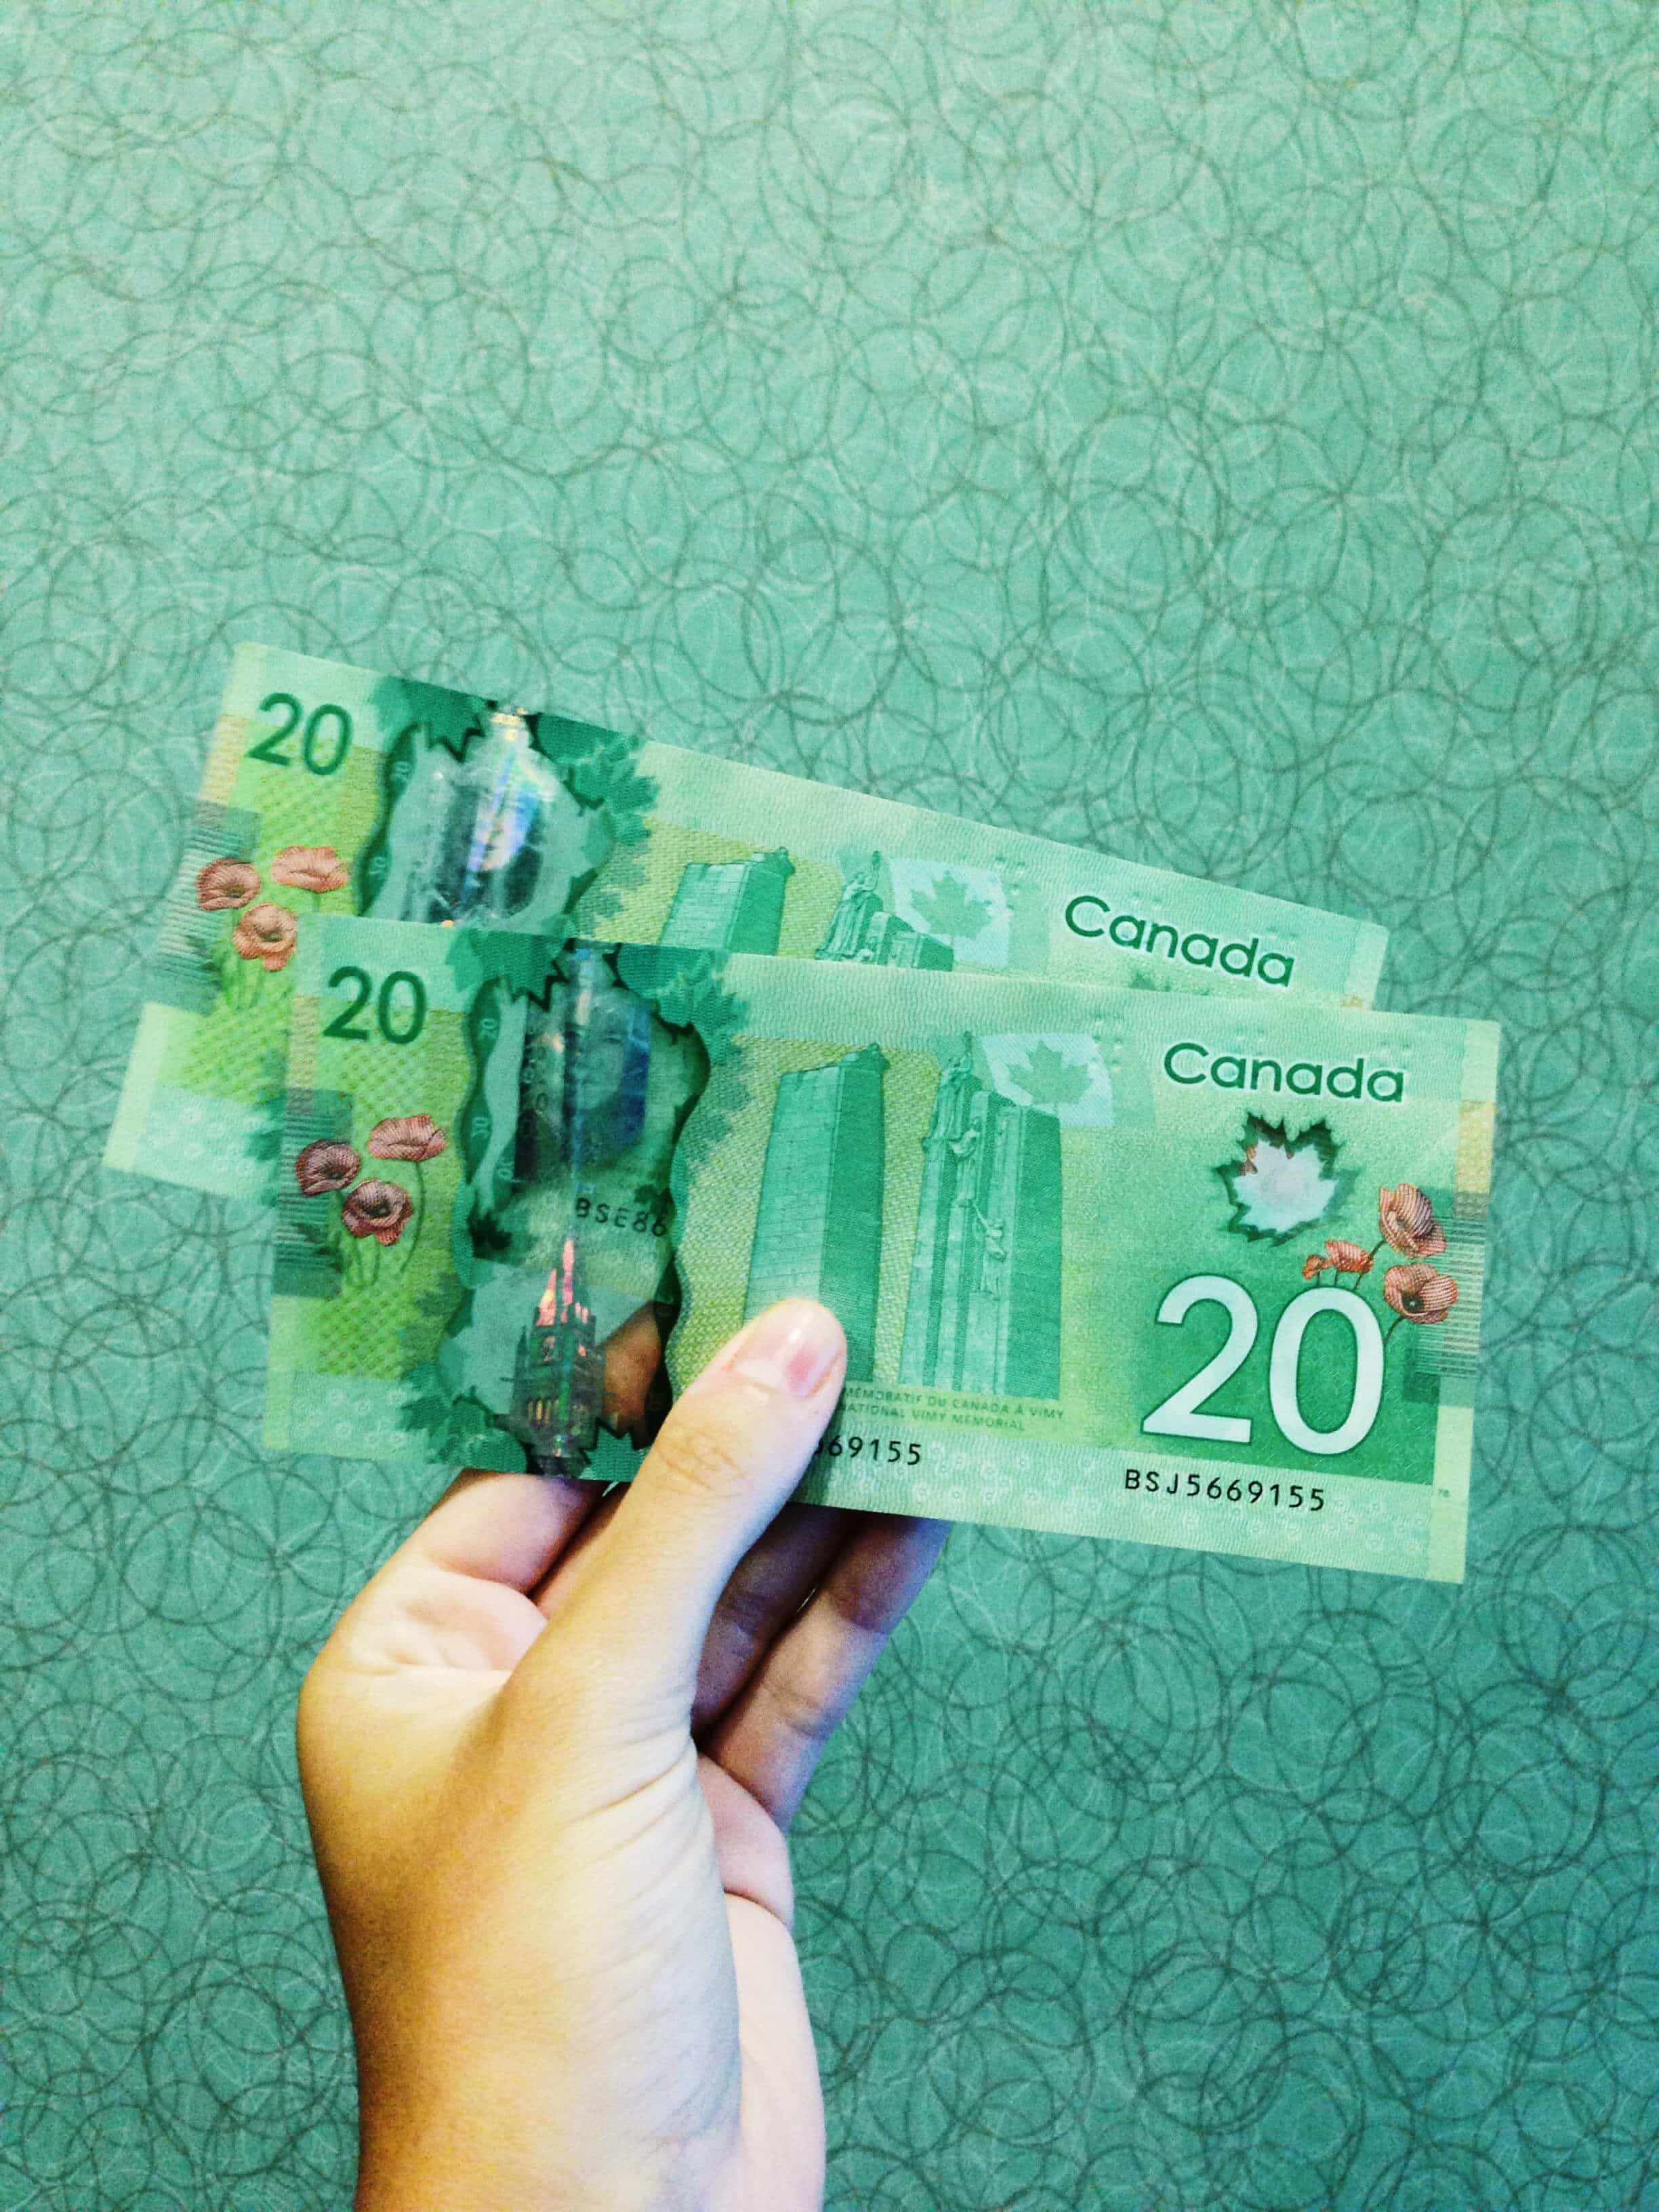 Working Canadian government requires proof of CAD$2500 to support yourself and an onward/return flight. If you don’t have any outbound flights booked, enough funds would also be ok. We quickly found out that money in Canada, especially in Vancouver, won’t get you far.